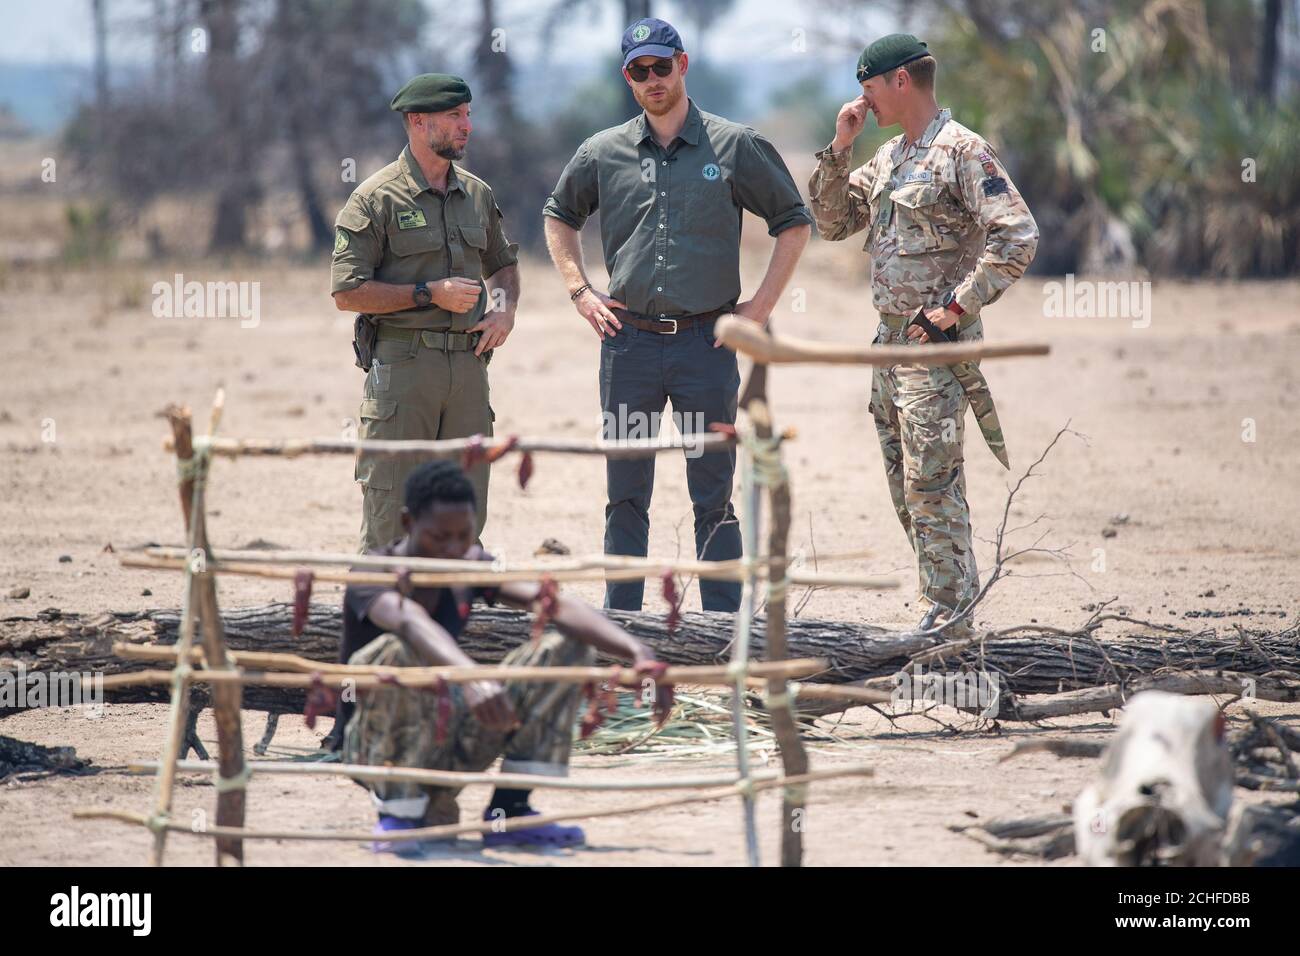 The Duke of Sussex views a recreation of a poacher's camp, part of an anti-poaching demonstration exercise conducted jointly by local rangers and UK military, at Liwonde National Park, Malawi. PA Photo. Picture date: Monday September 30, 2019. See PA story ROYAL Tour . Photo credit should read: Dominic Lipinski/PA Wire Stock Photo